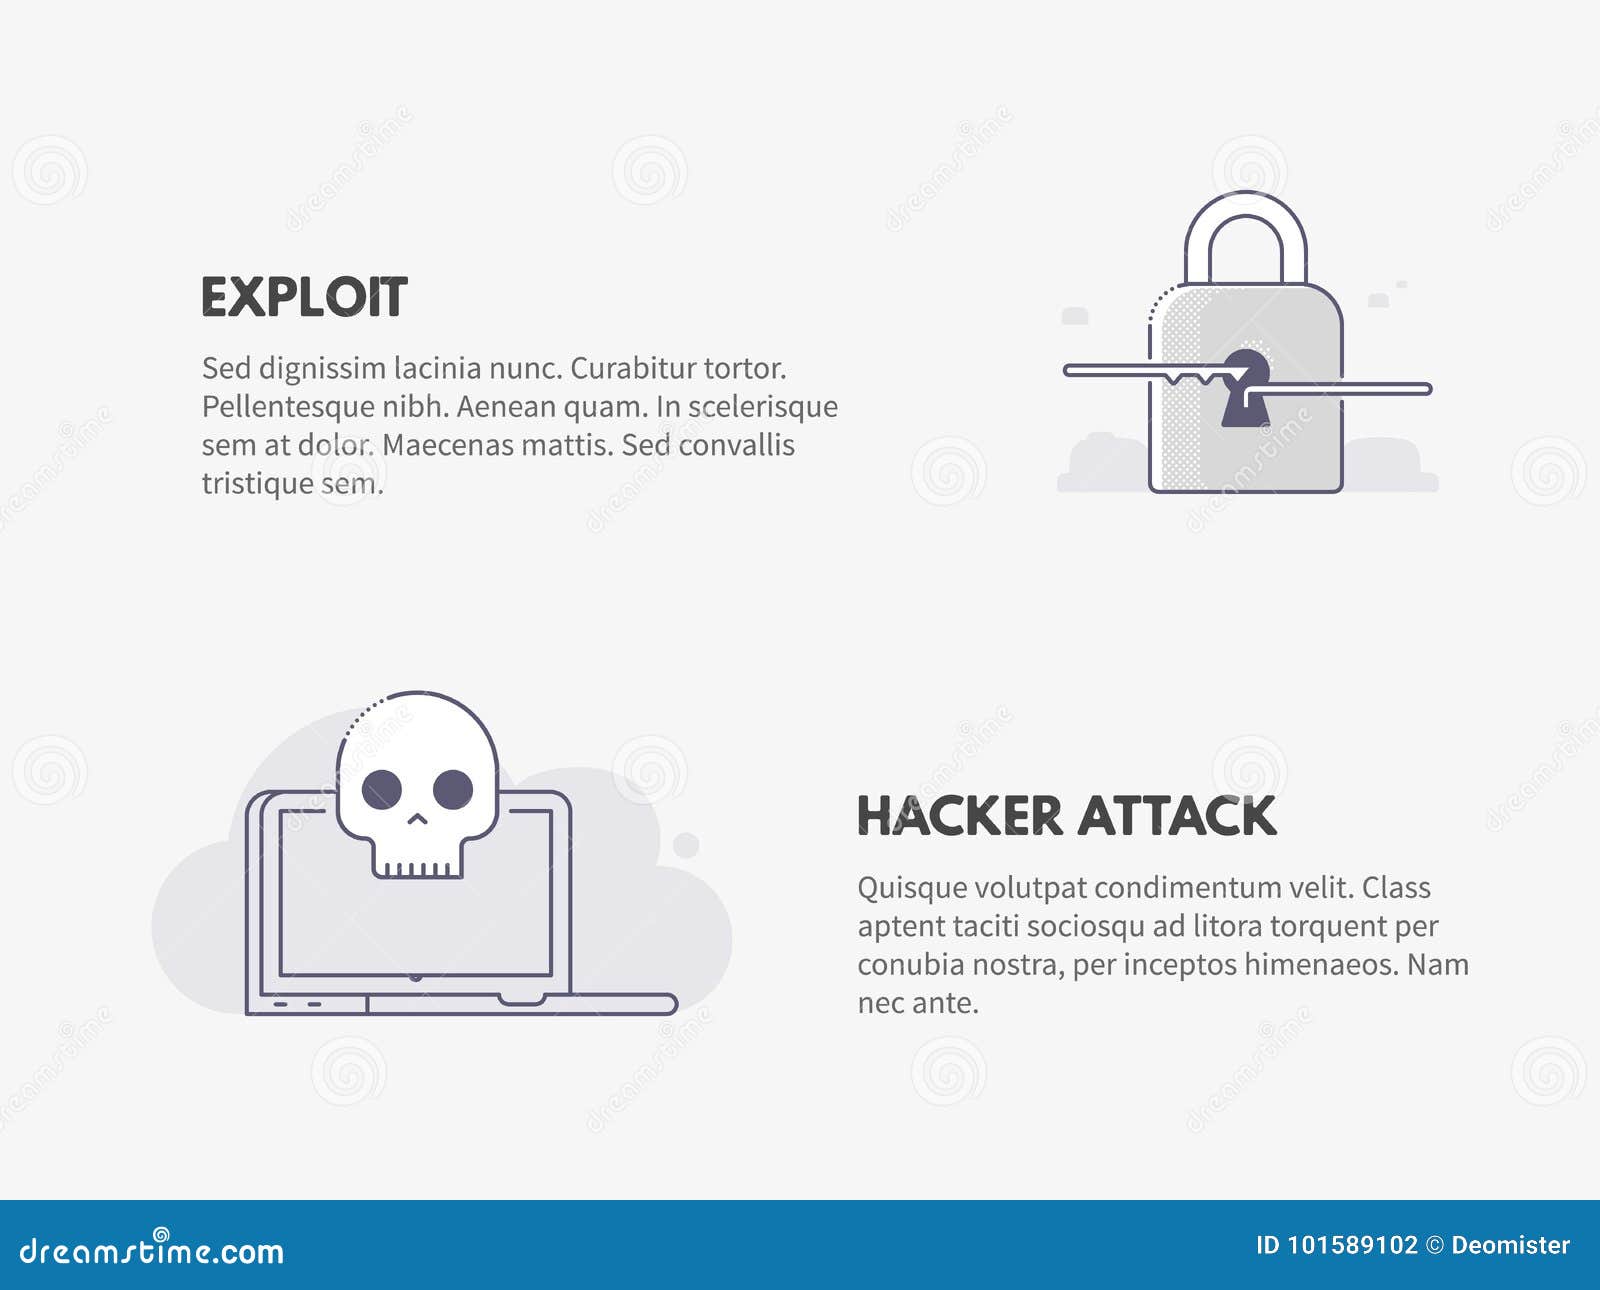 exploit and hacker attack. cyber security concept.